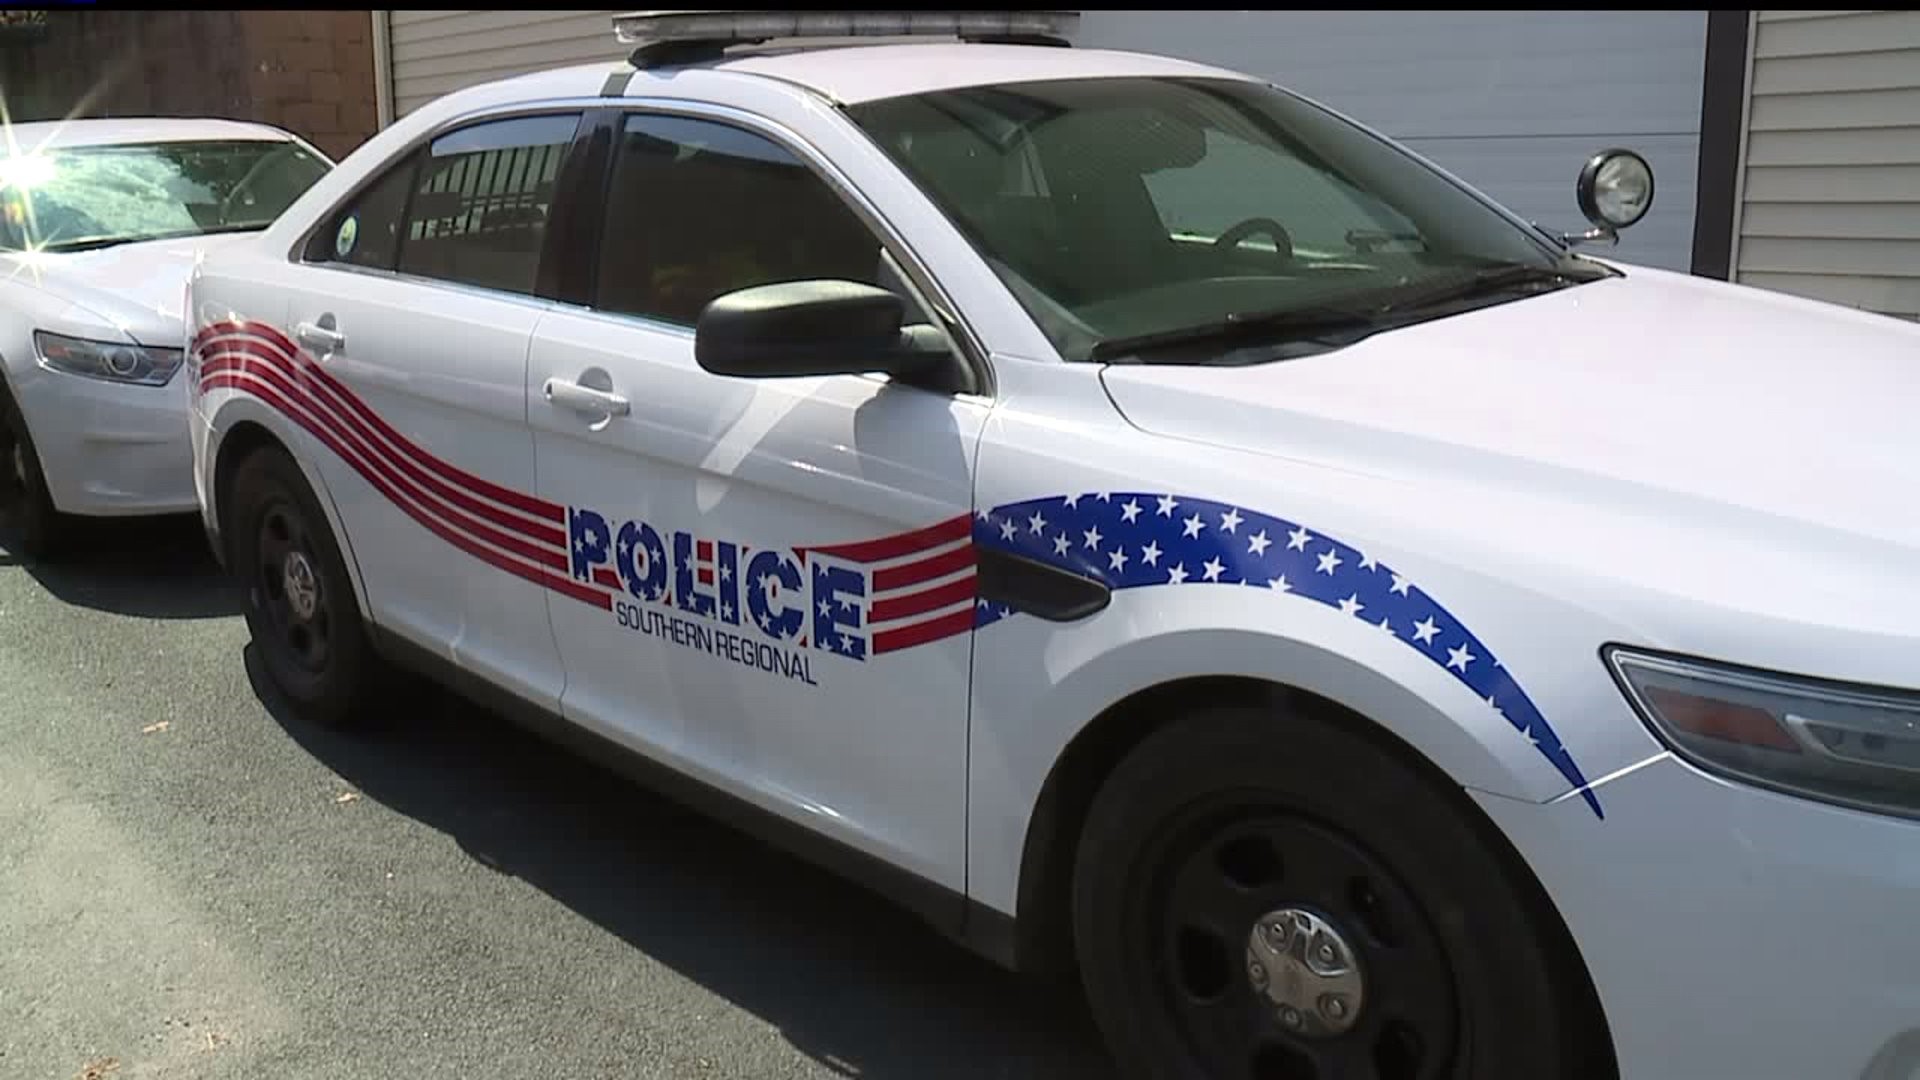 Funding issues leads to changes for Southern Regional Police in Lancaster Co.